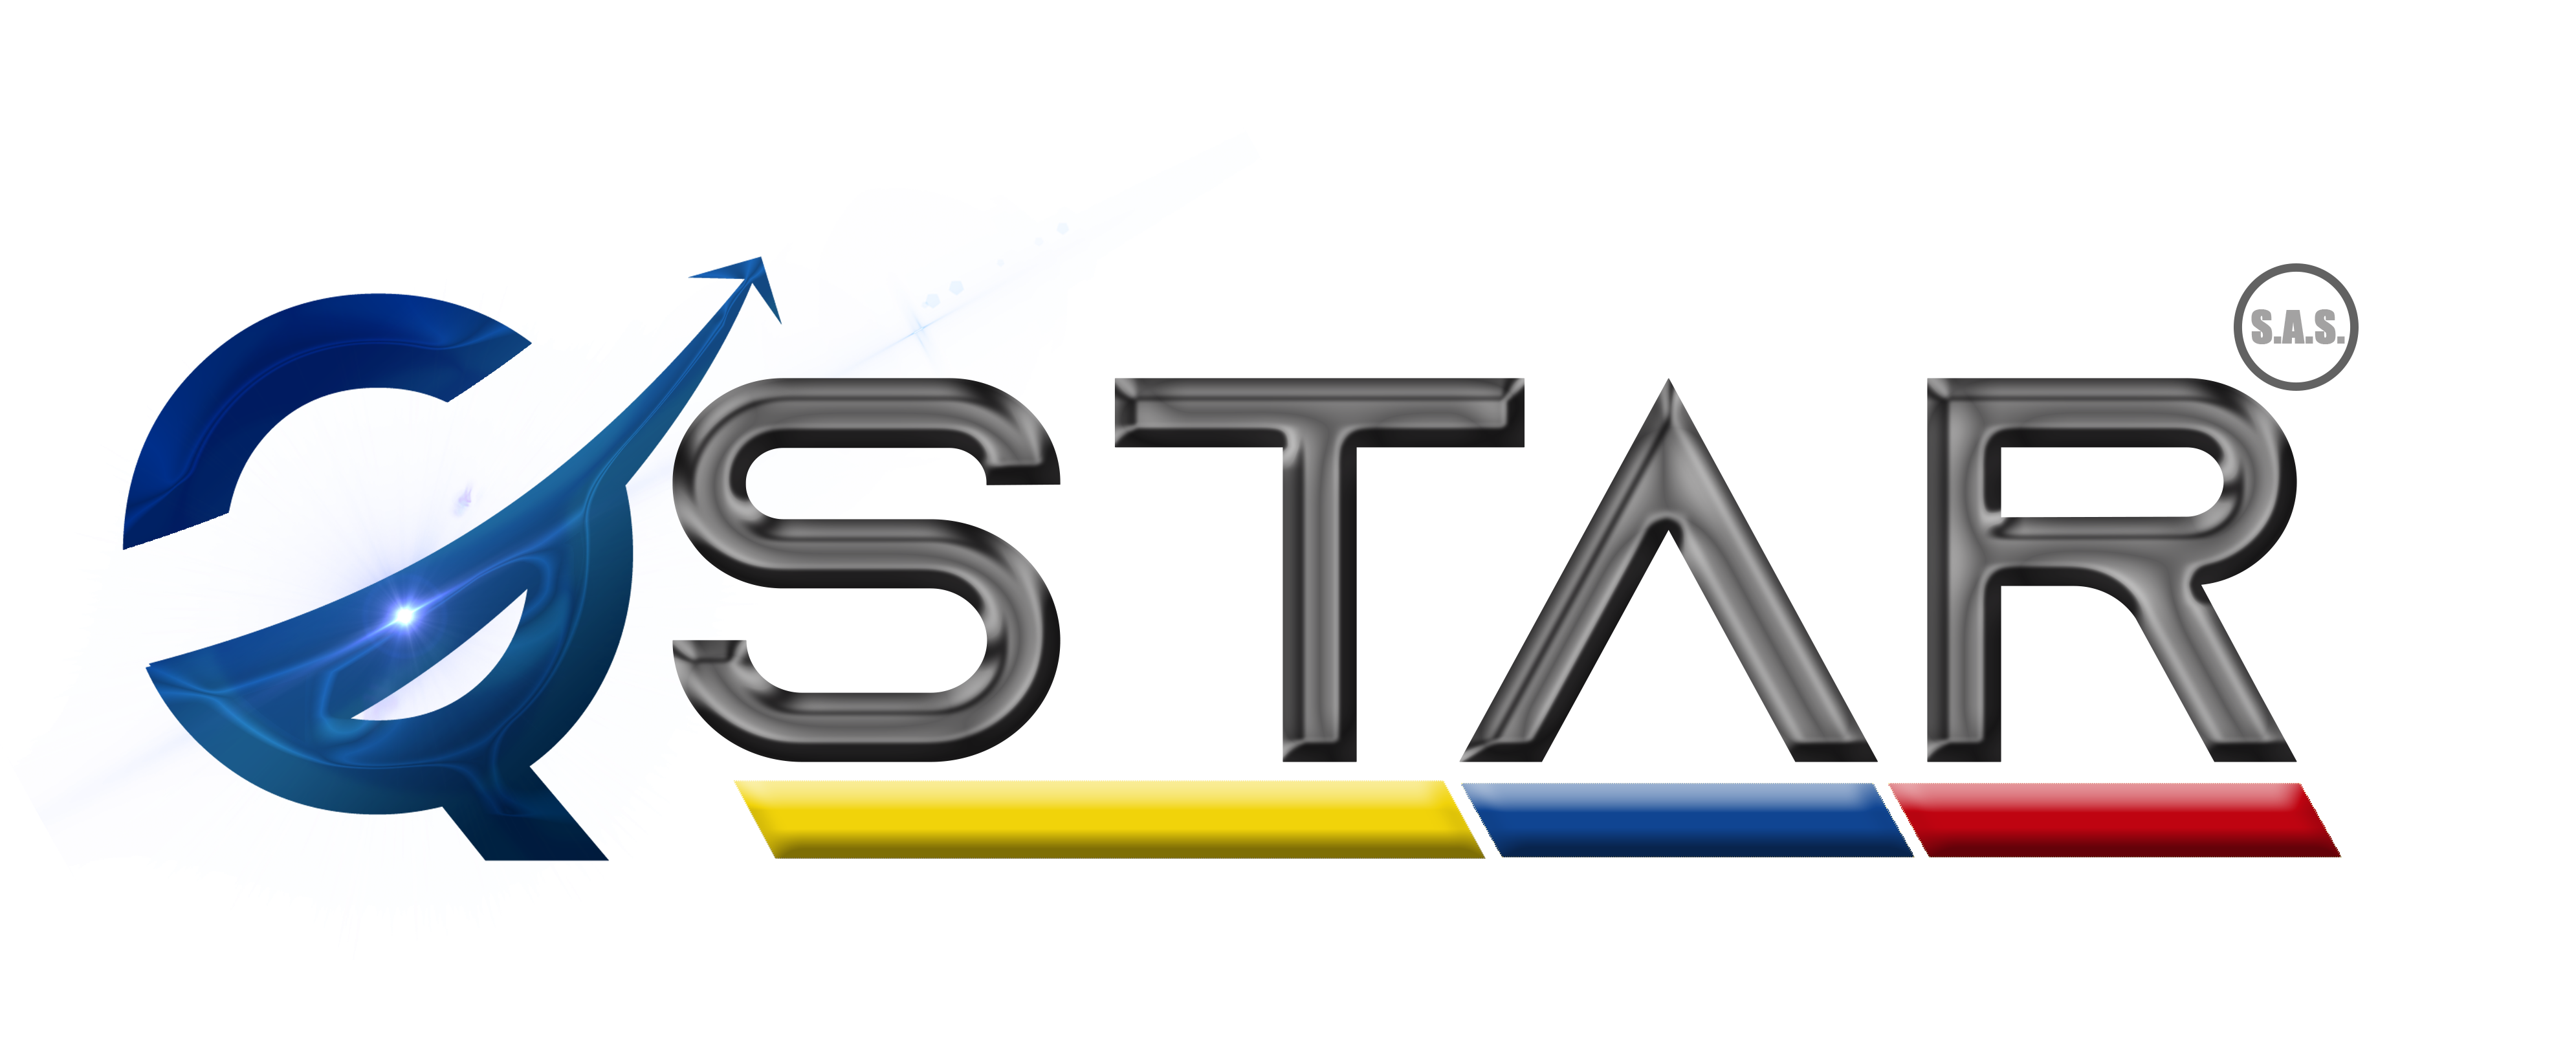 Qstar Colombia